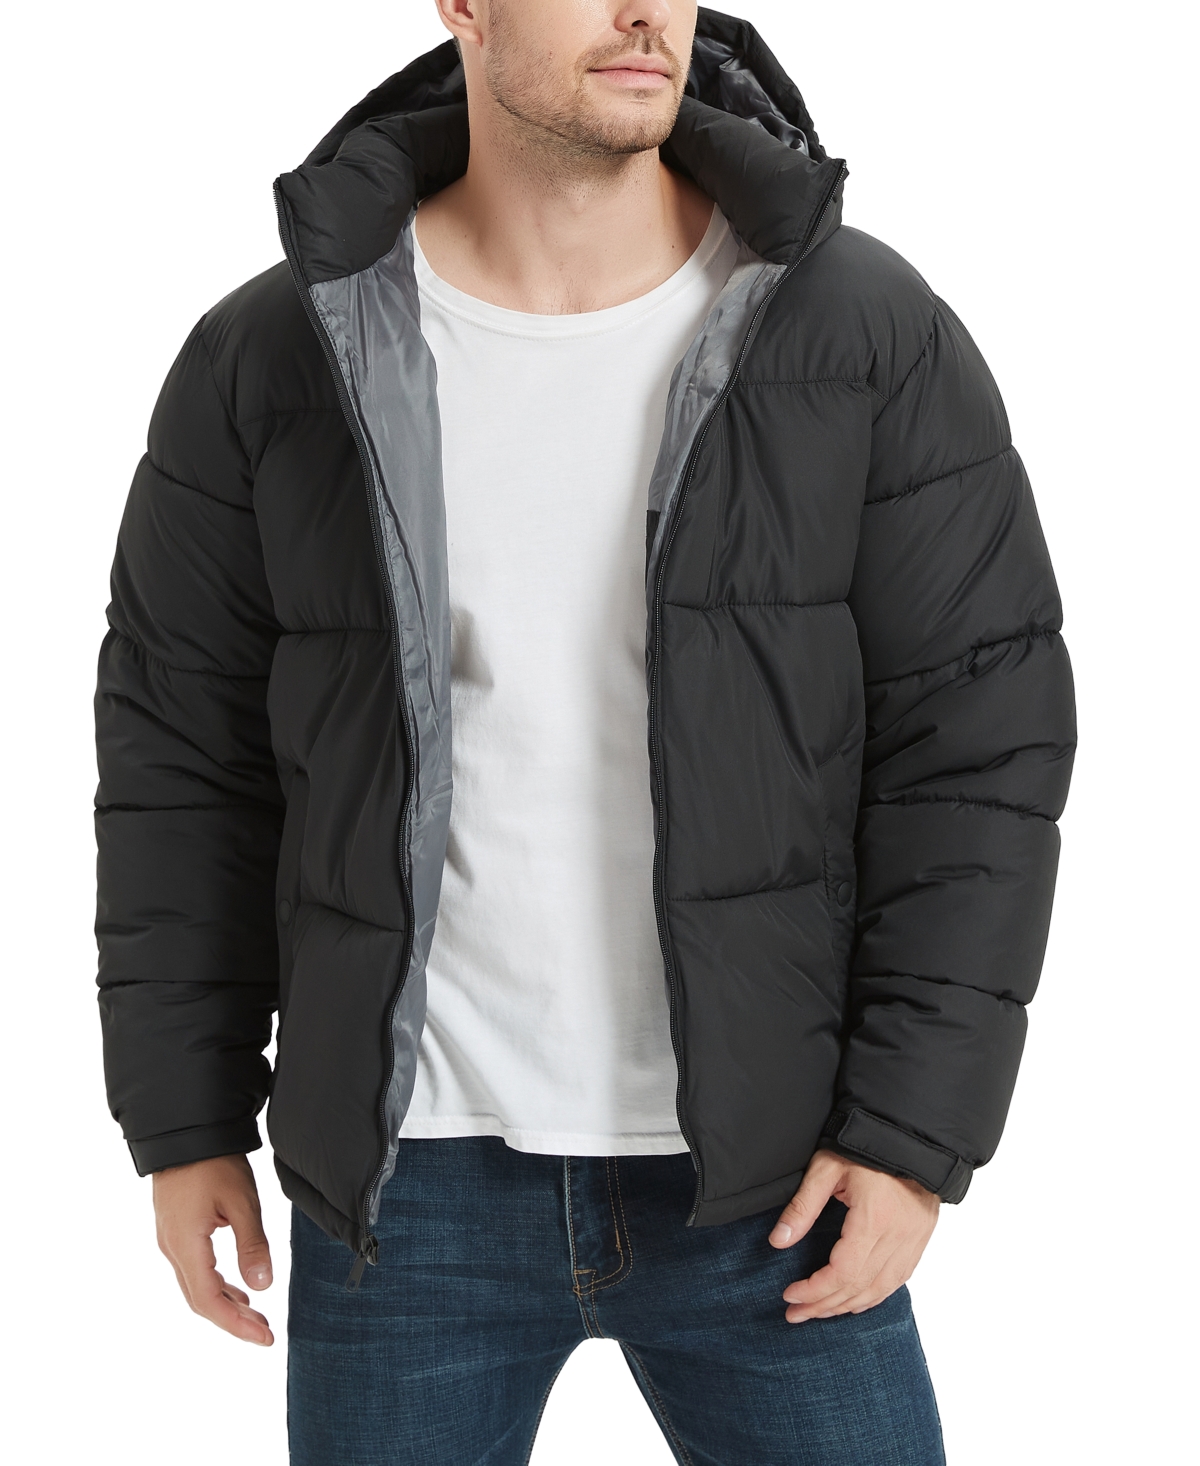 Men's Quilted Zip Front Hooded Puffer Jacket - Black